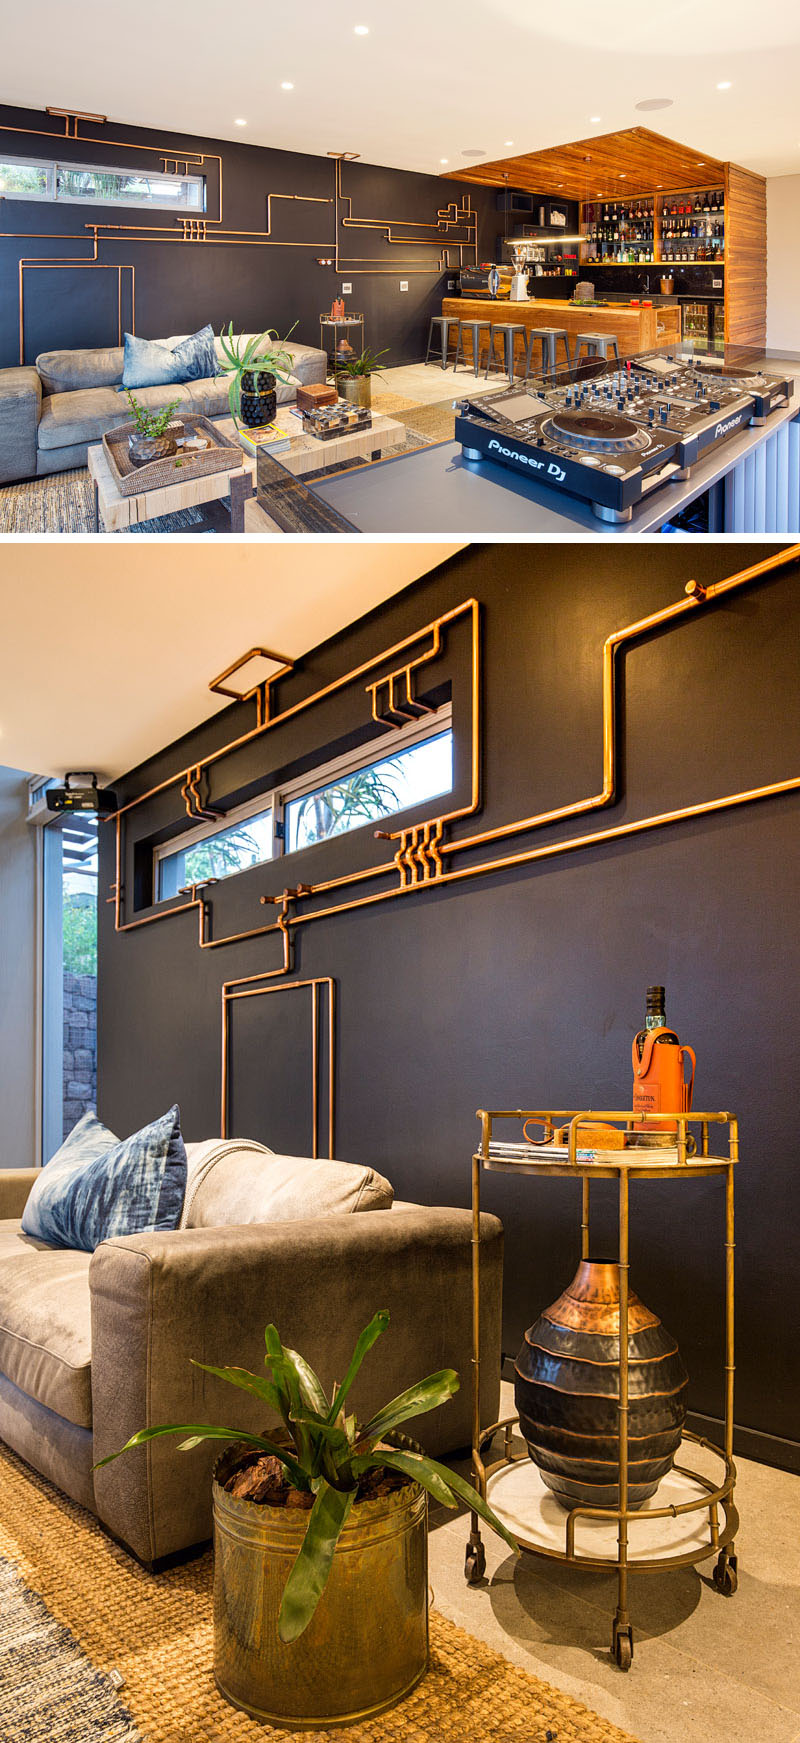 Steampunk inspired, exposed copper piping stands out on the black accent wall in this modern space. A customised DJ booth faces a grey upholstered couch, where guests can soak up music and drinks.